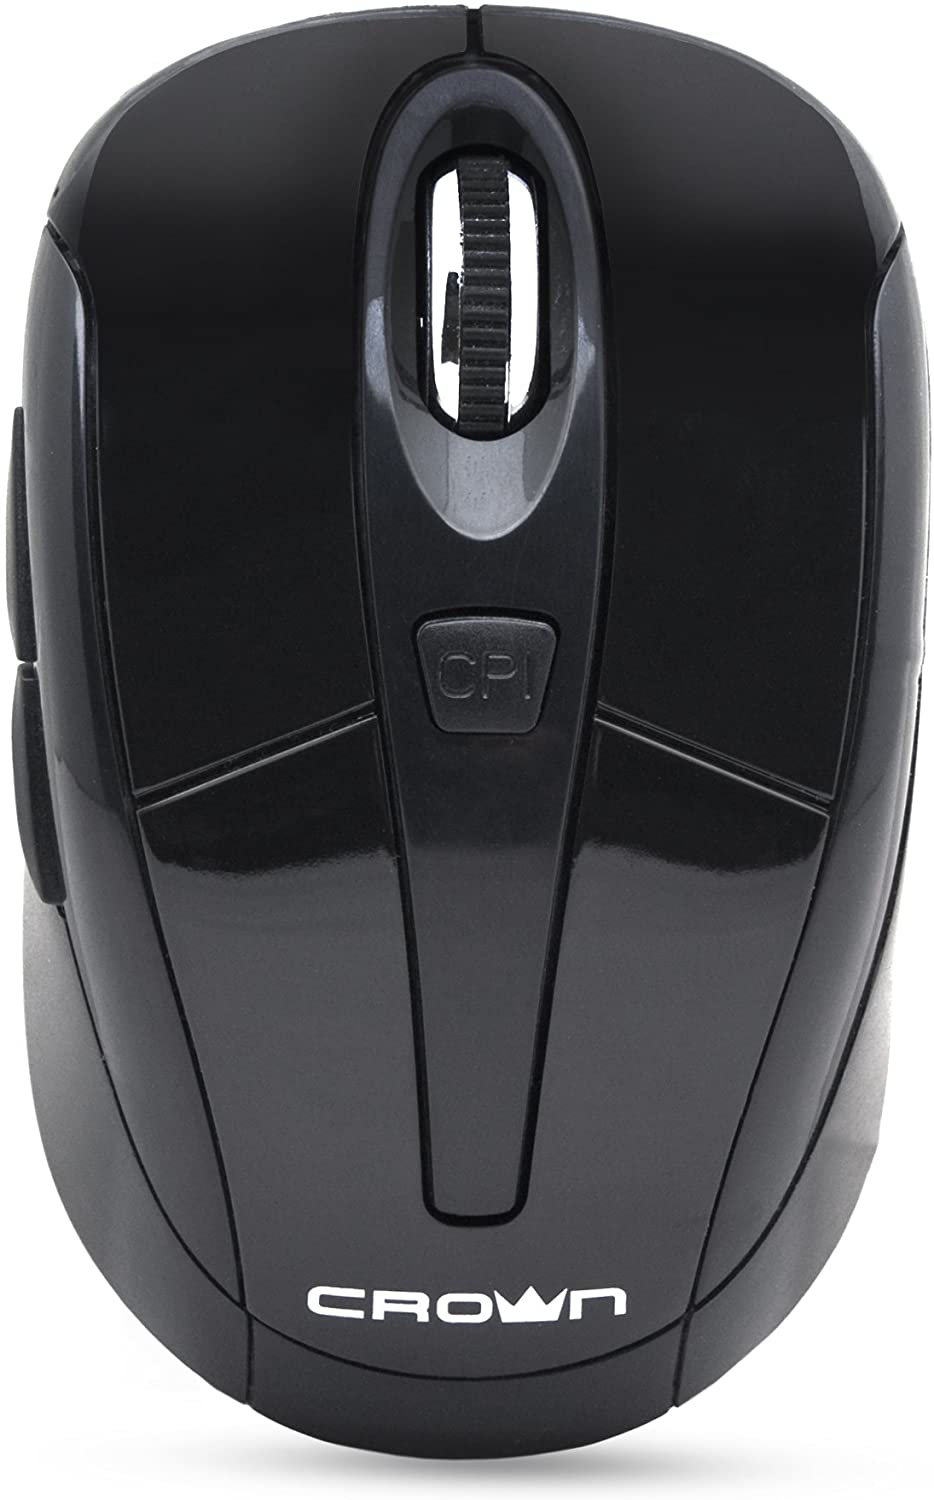 Crown wireless mouse CMM-965W | Laptop & Gaming | Mobile & laptop accessories | OTHER APPLIANCES